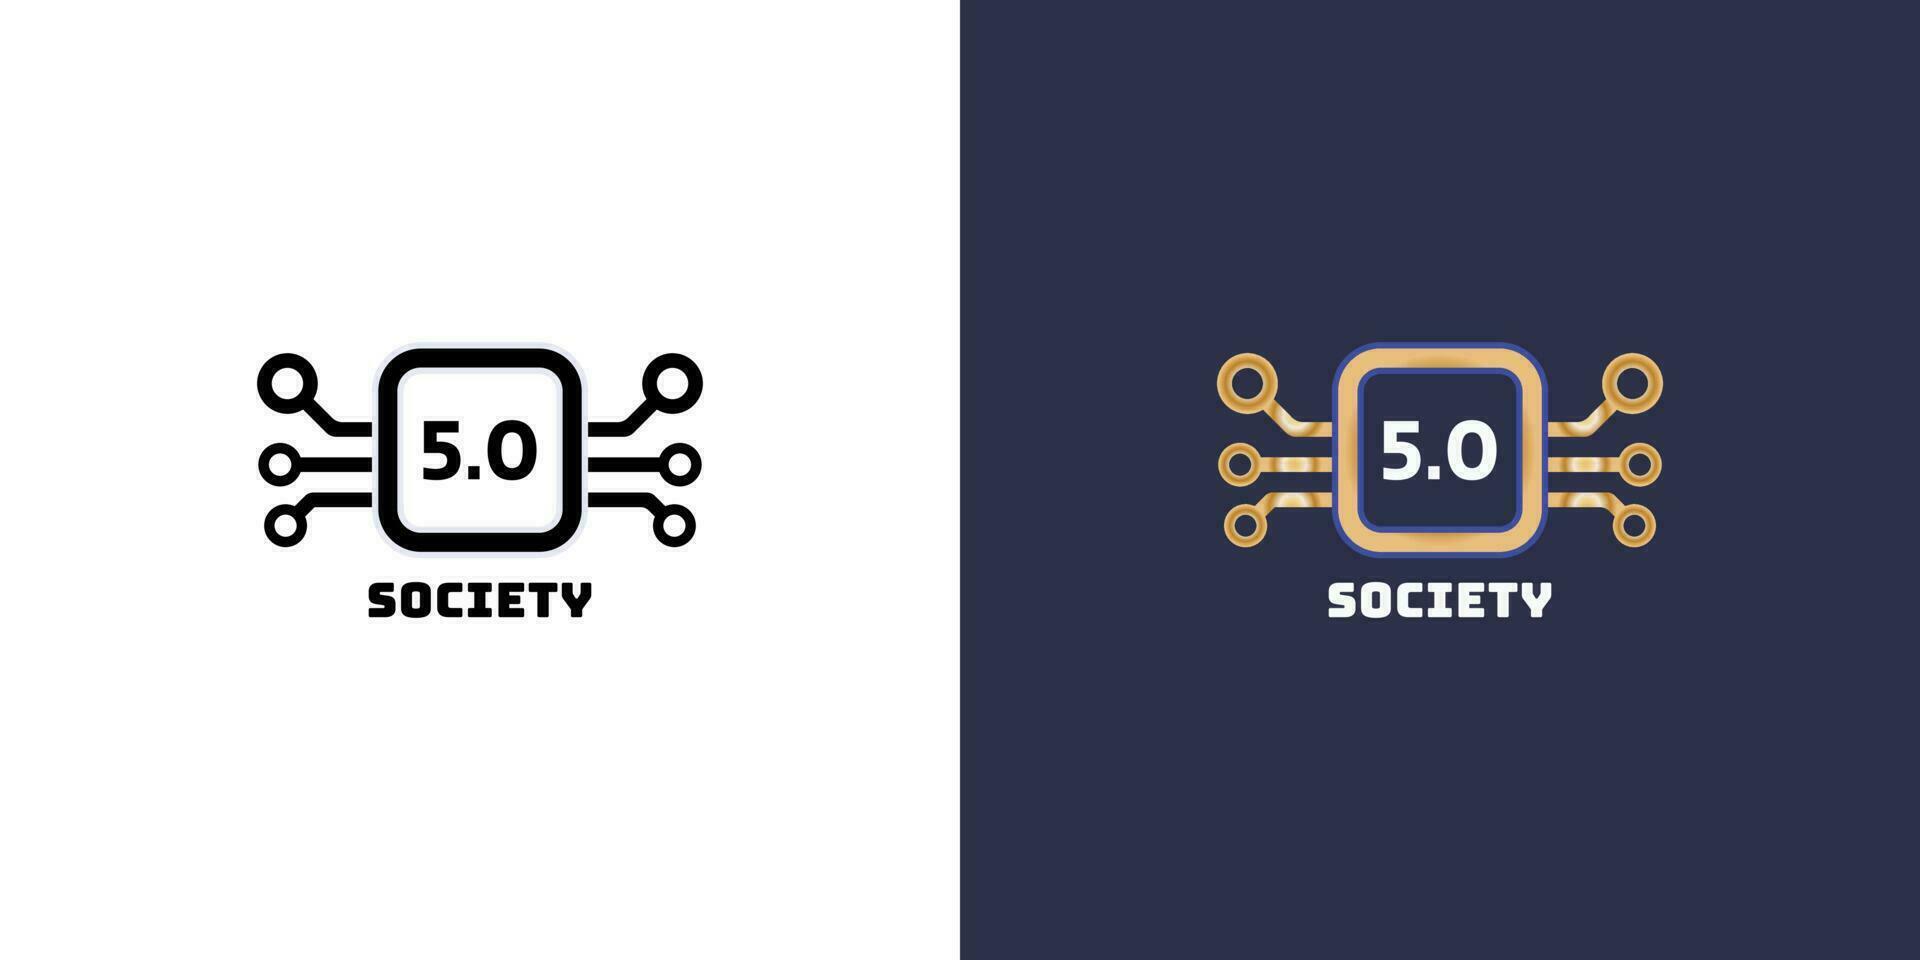 Society 5.0 logo design in different color set. Sustainable technological developments in industry 5.0 vector